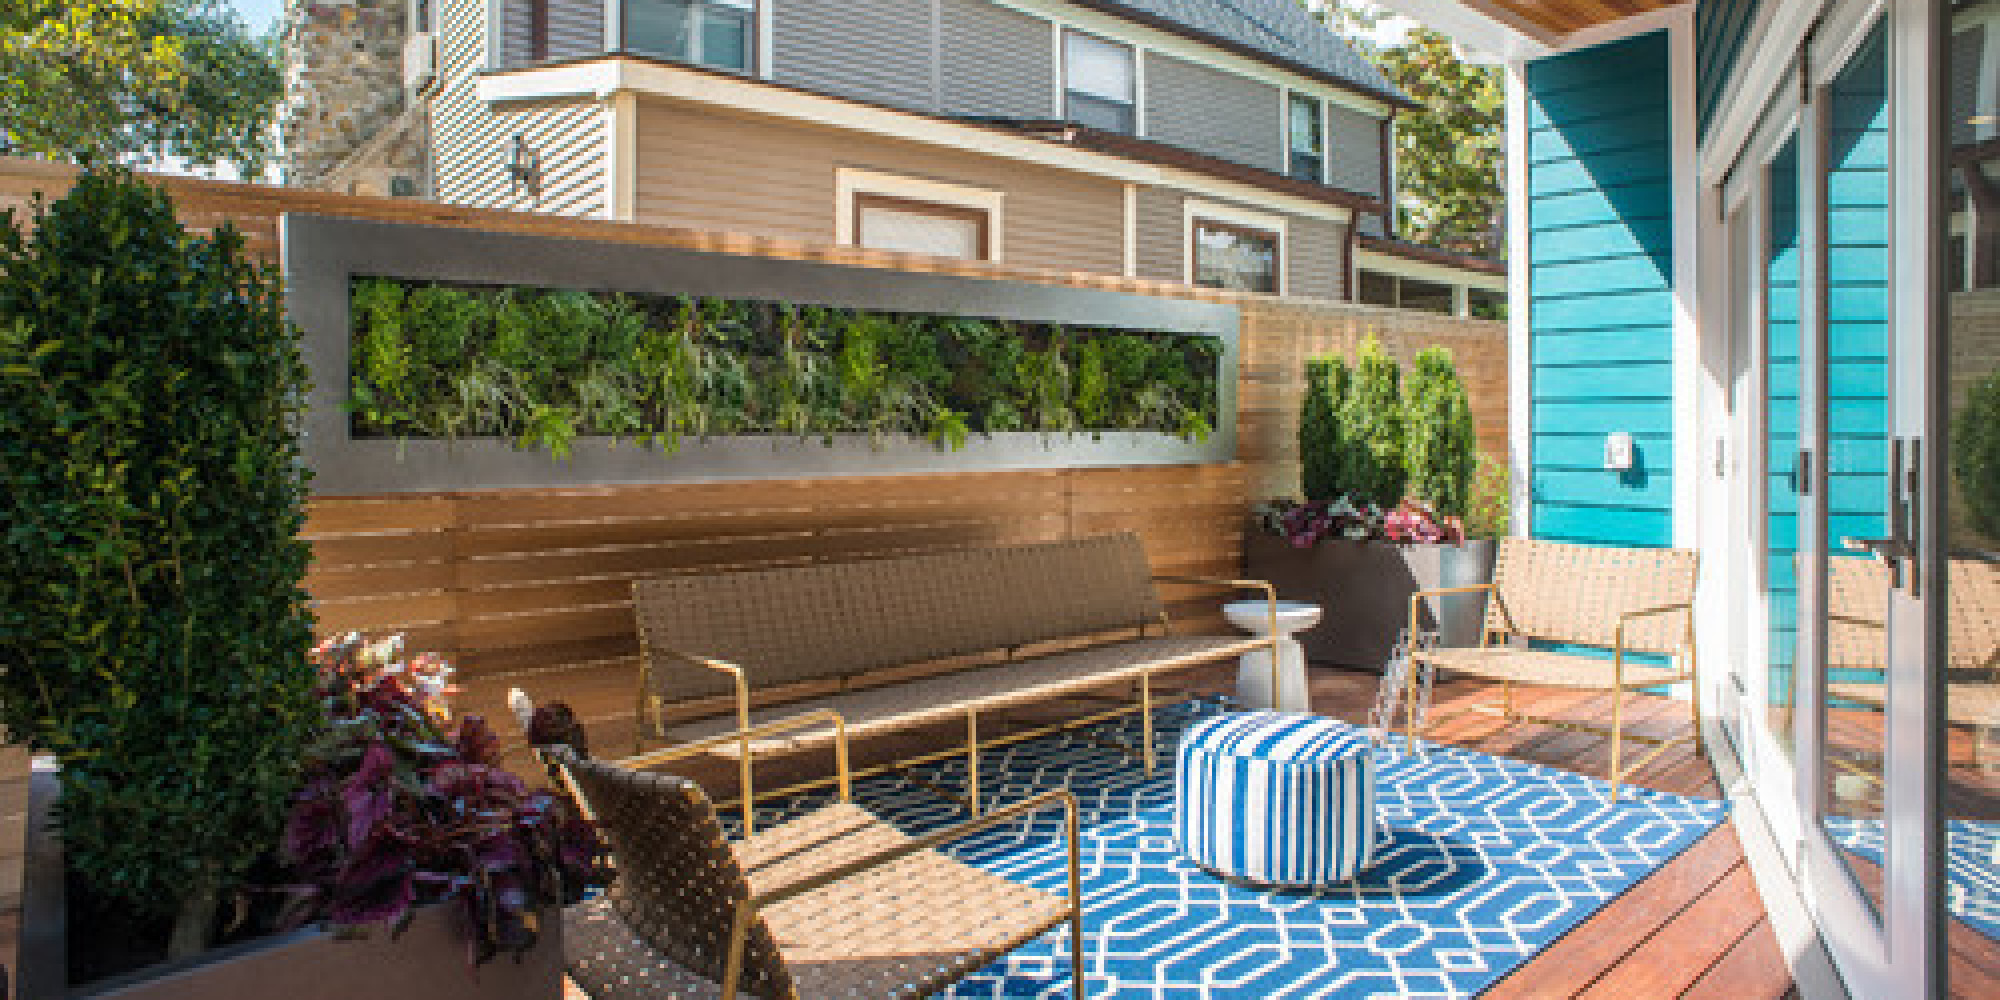 Deck Ideas For Small Backyard
 16 Ways to Get More from Your Small Backyard